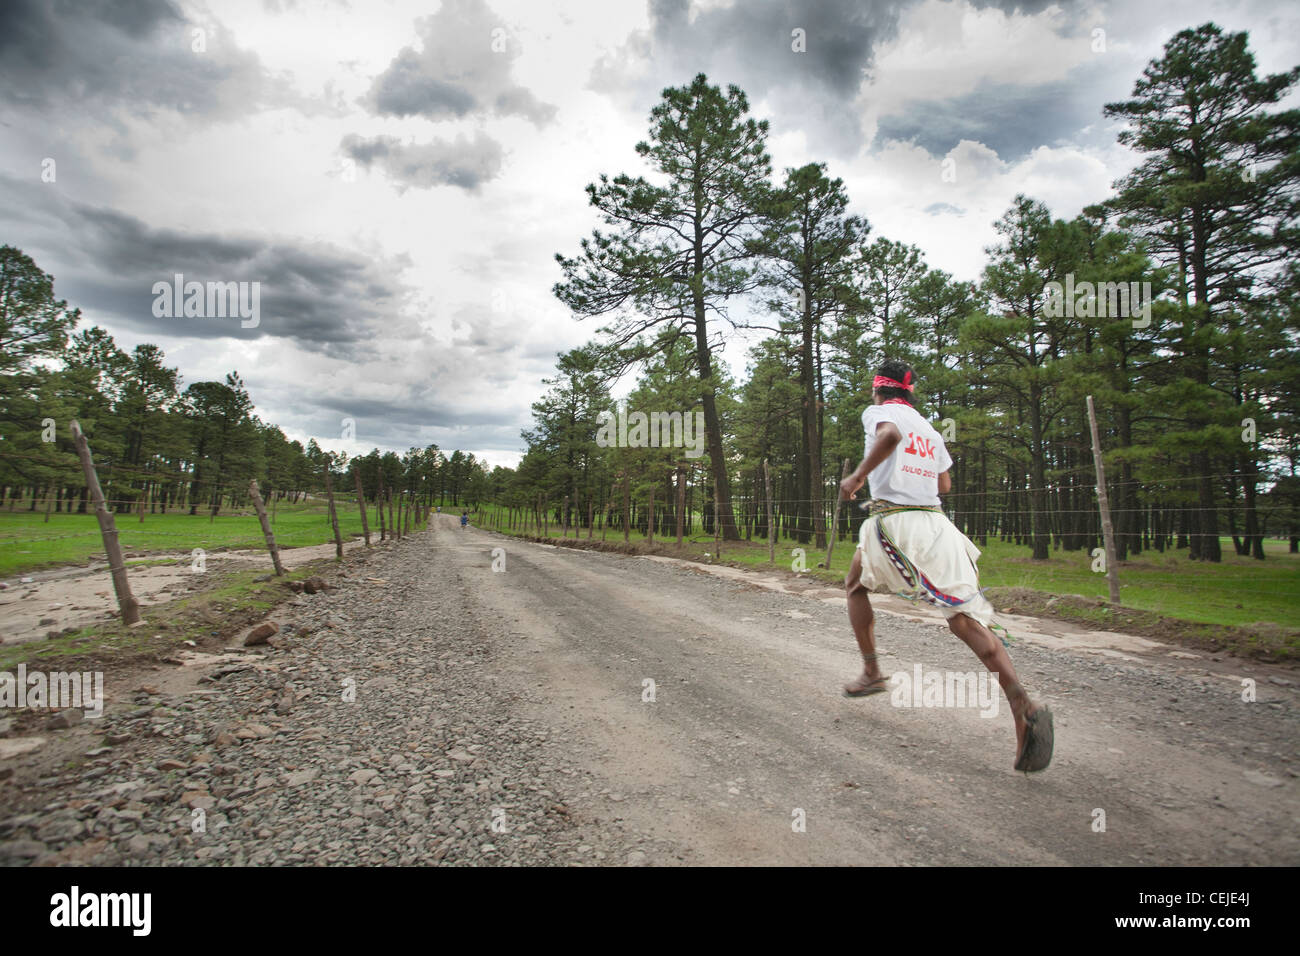 Tarahumara Runner Typically Dressed During A 10k Race At The Stock Photo Alamy